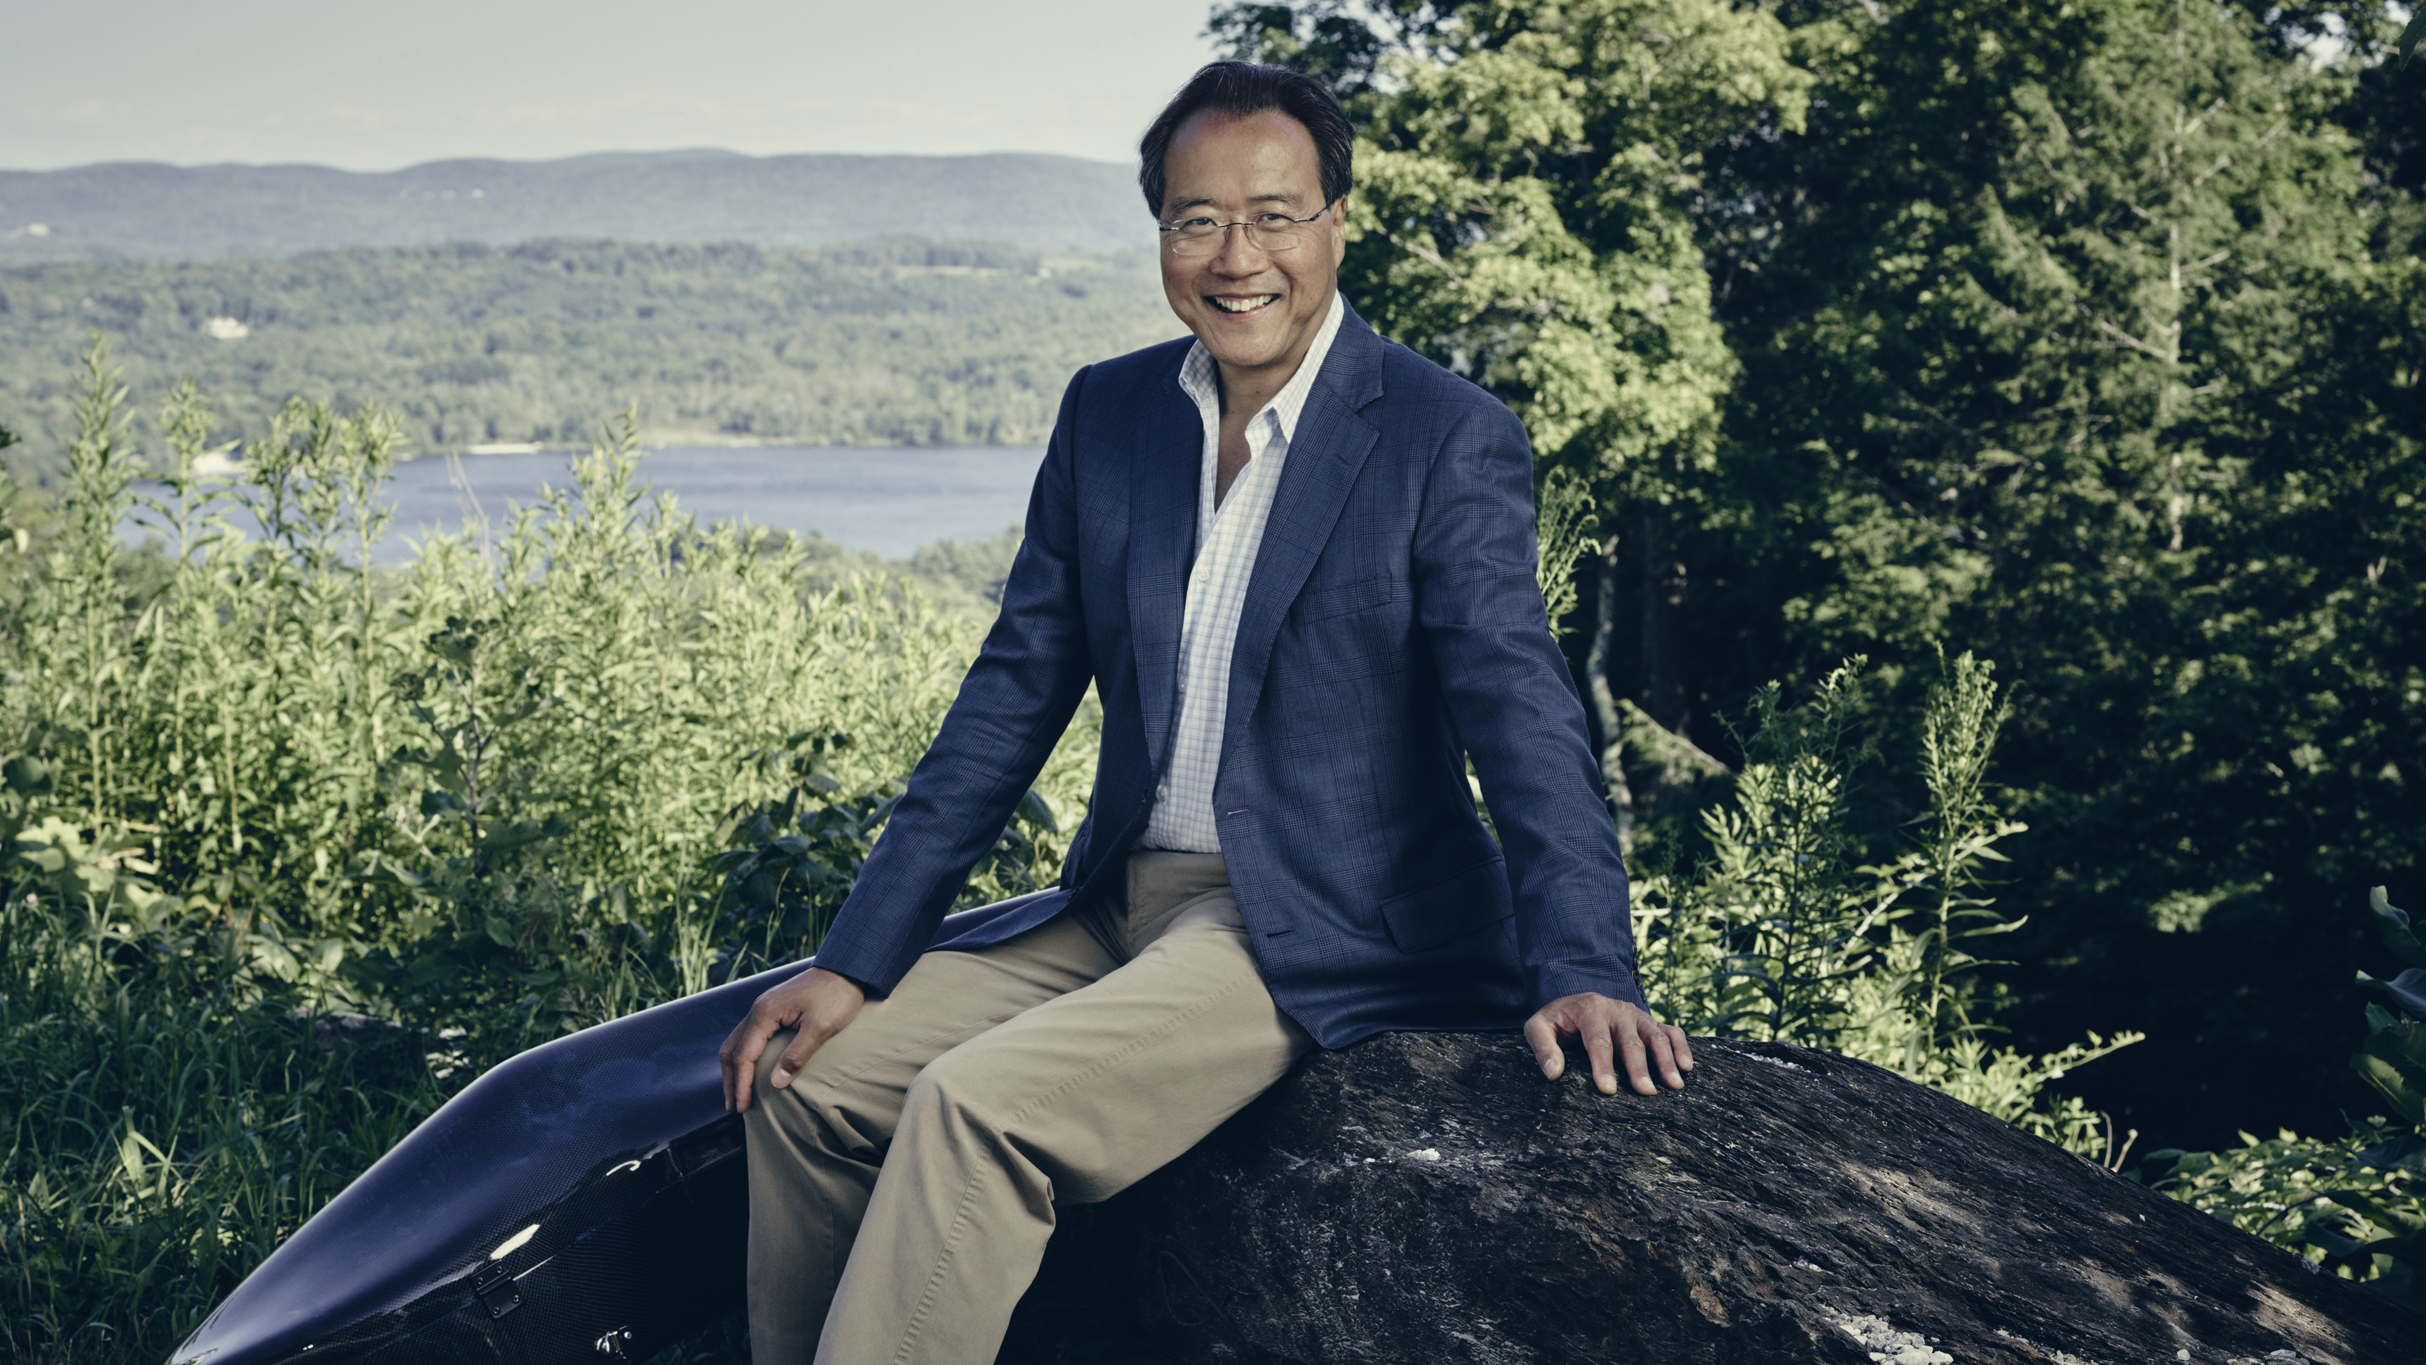 " An Afternoon with Yo-Yo Ma, in Conversation with Jeffery Brown"